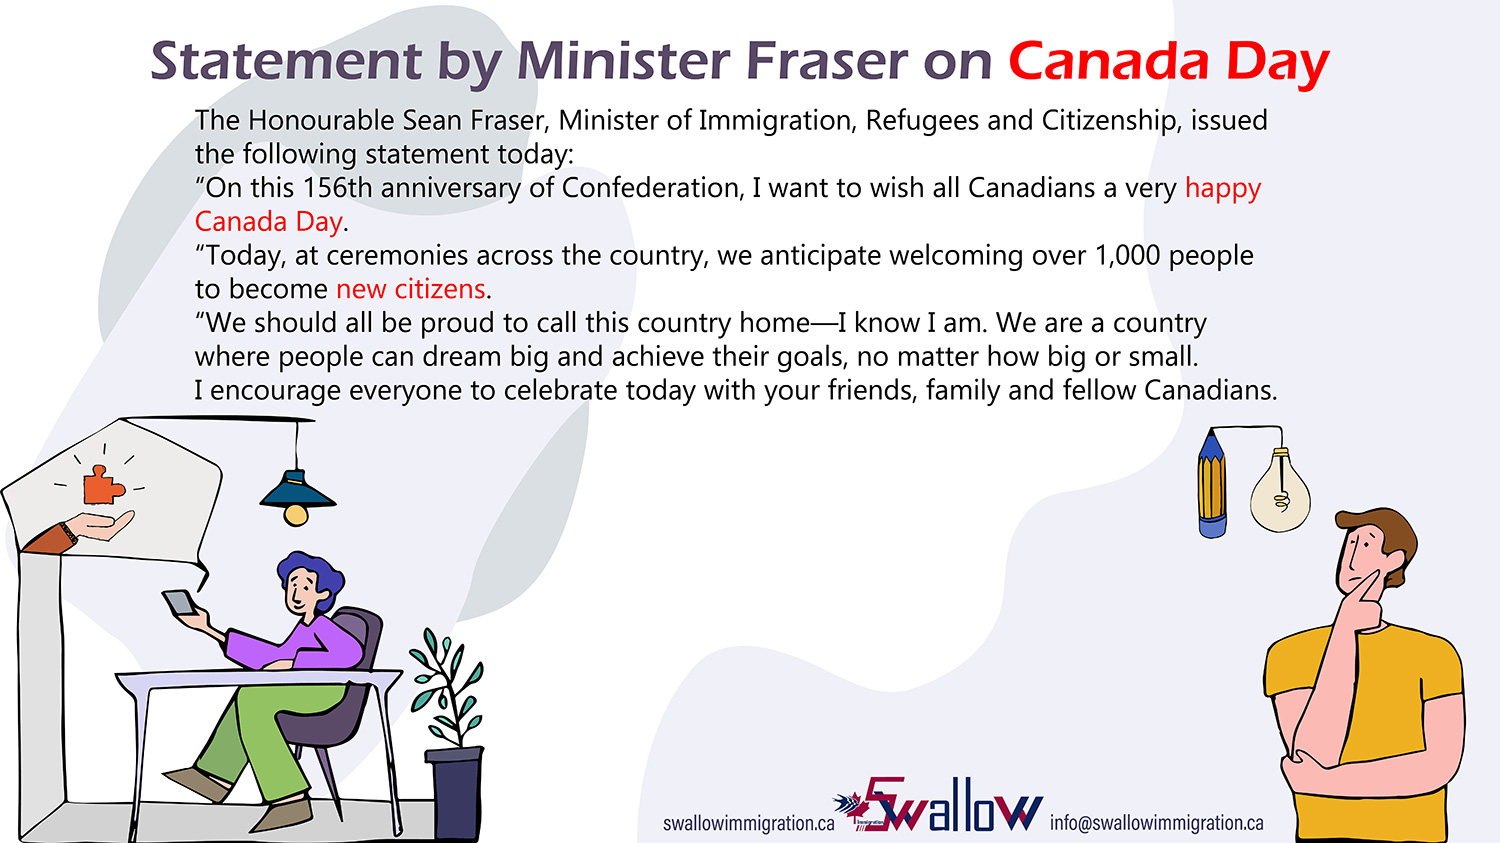 Statement by Minister Fraser on Canada Day